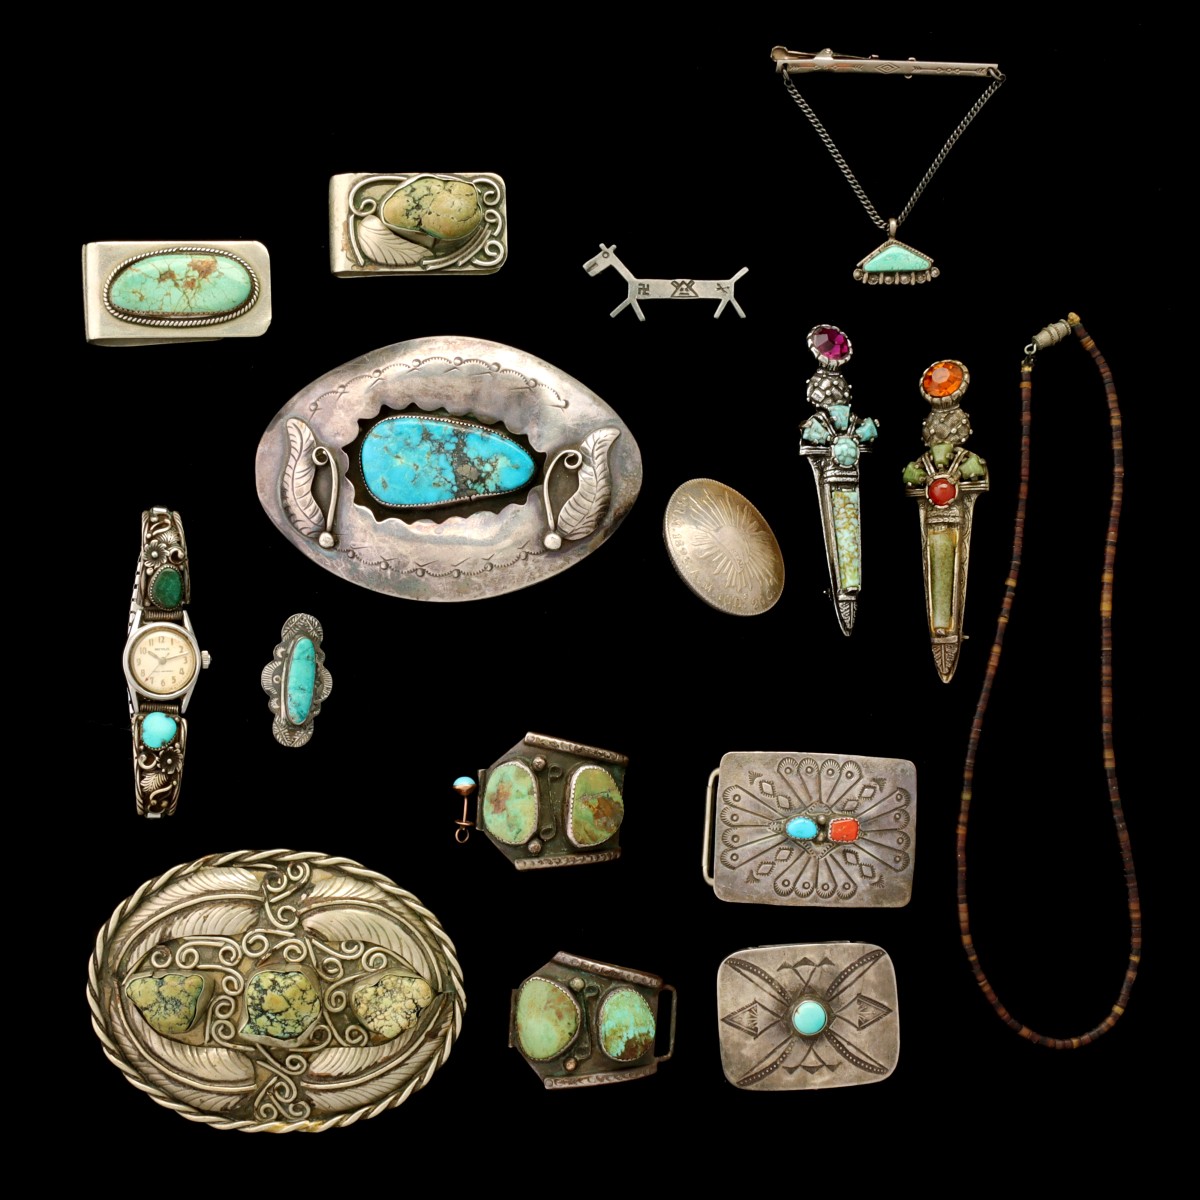 A COLLECTION OF NAVAJO SILVER JEWELRY WITH TURQUOISE